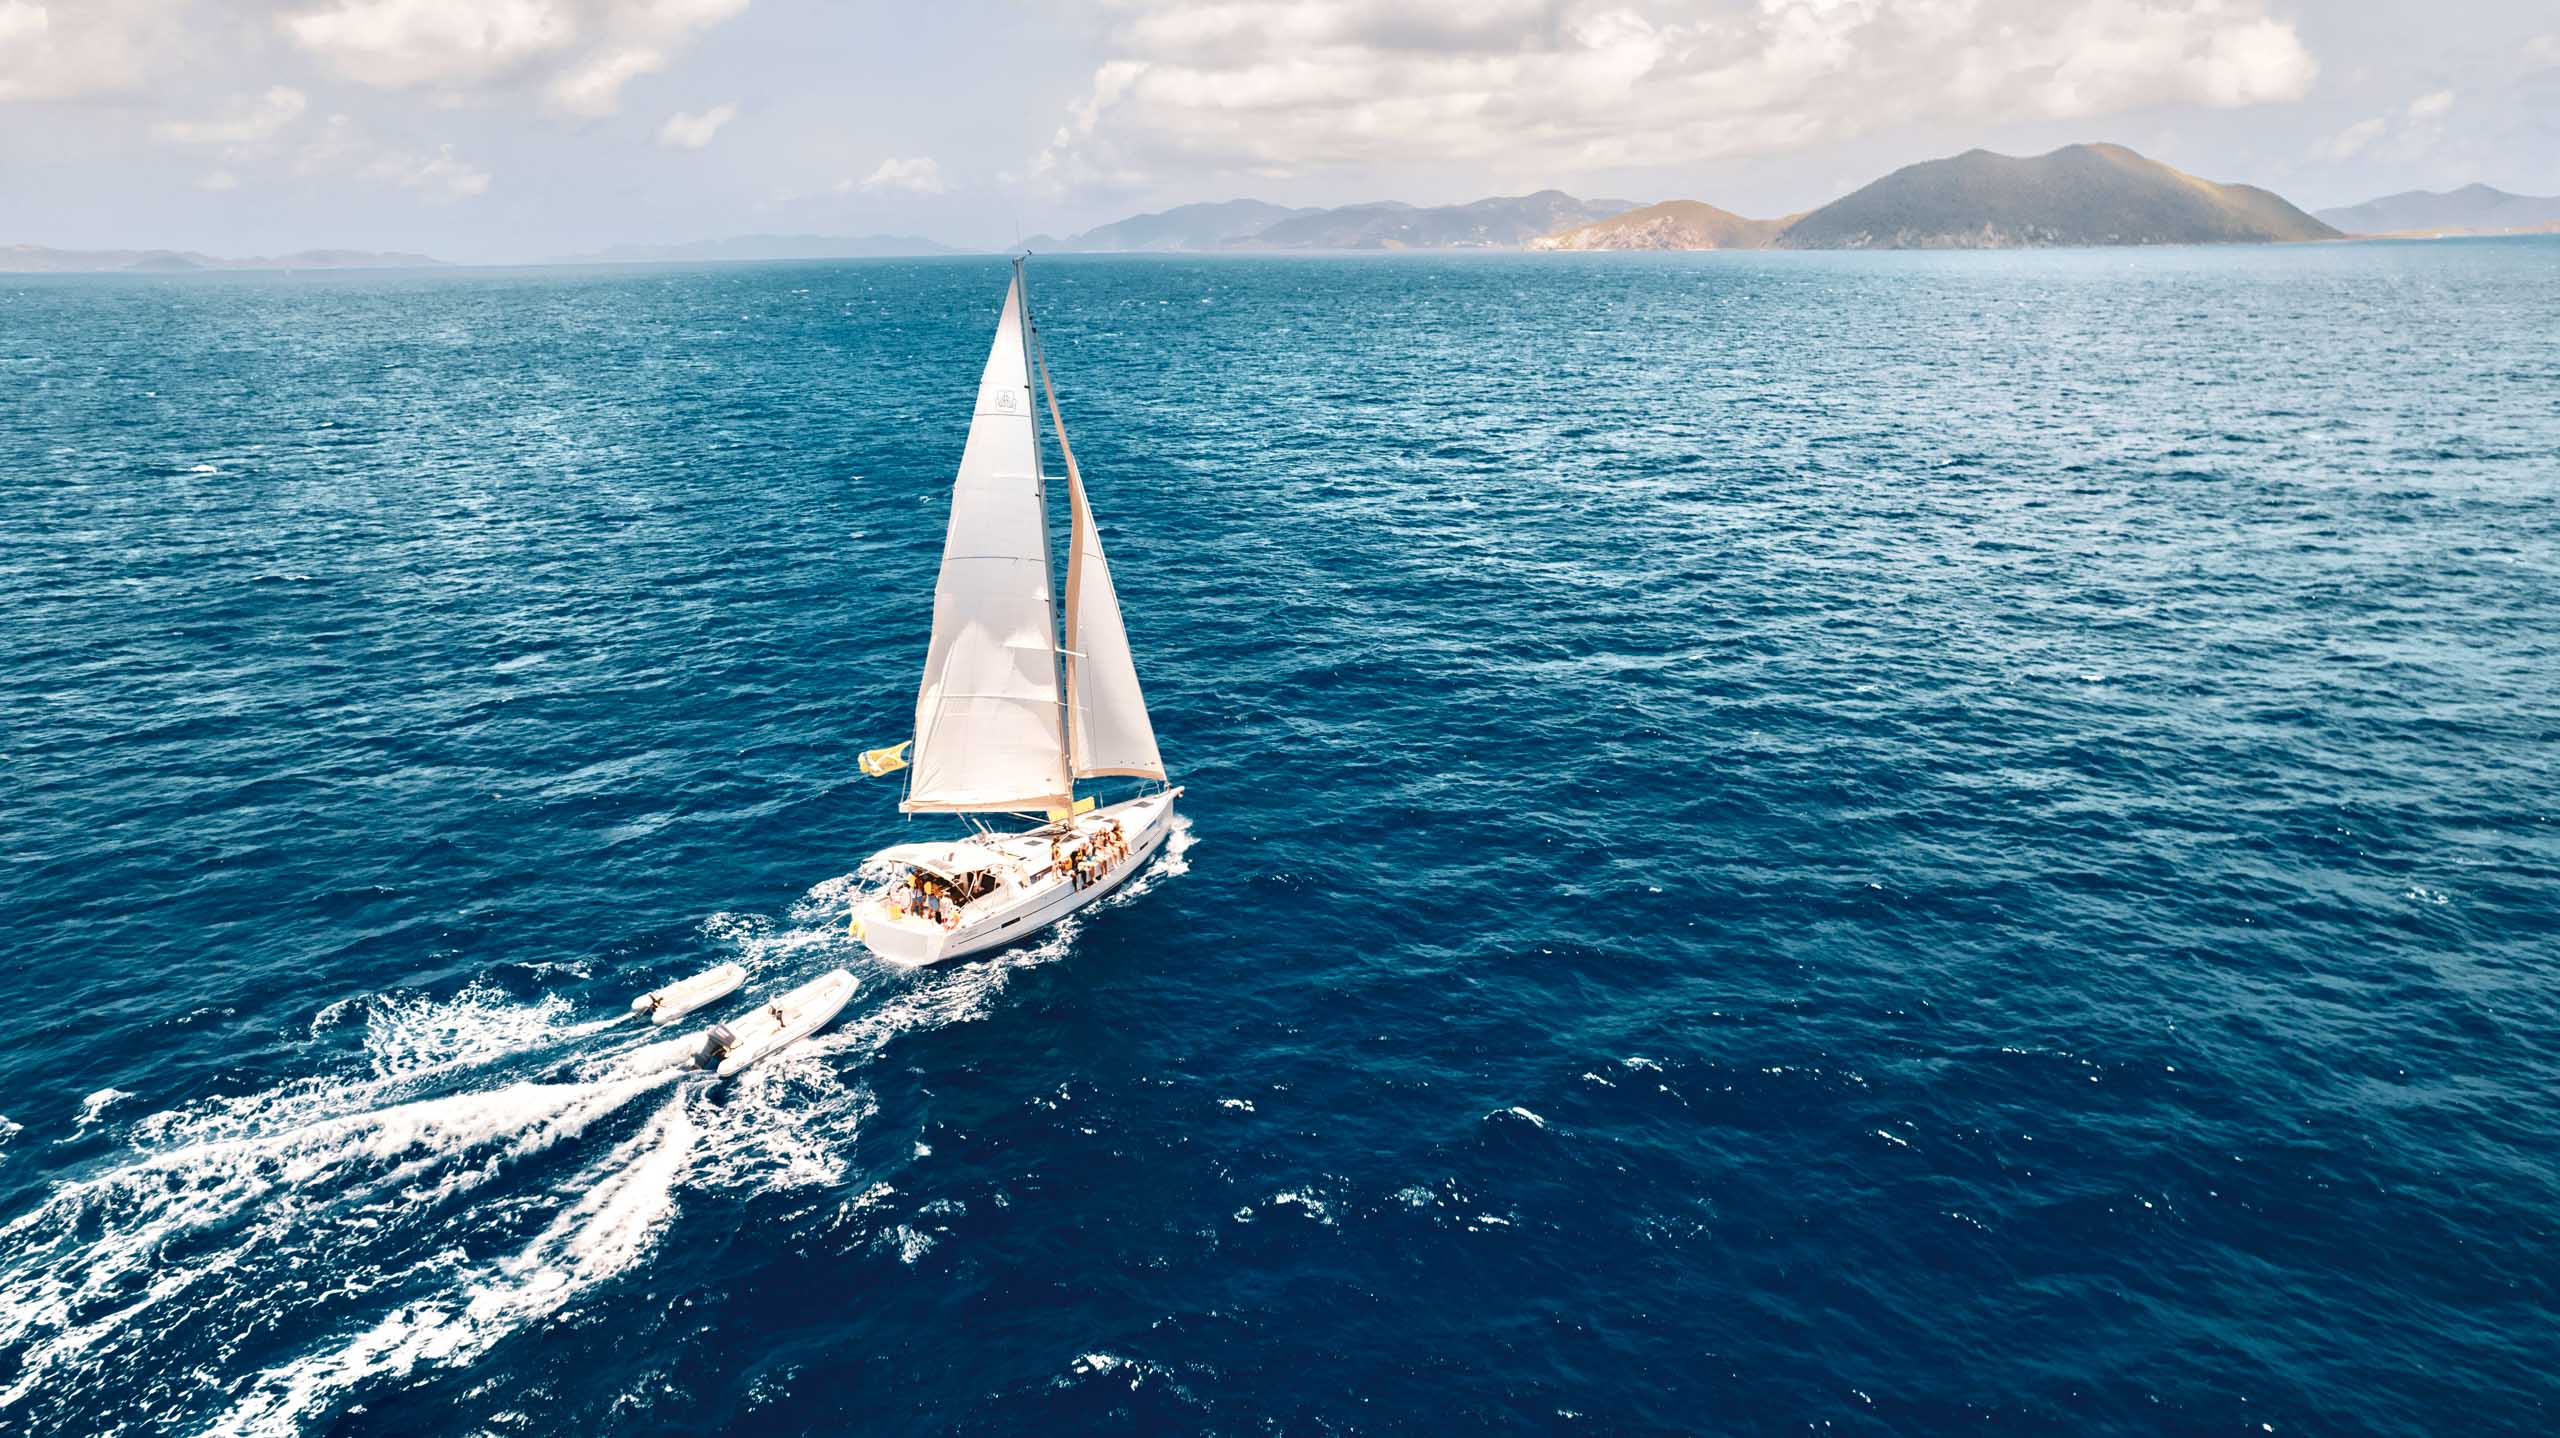 An aerial view of a sailboat sailing in the ocean.